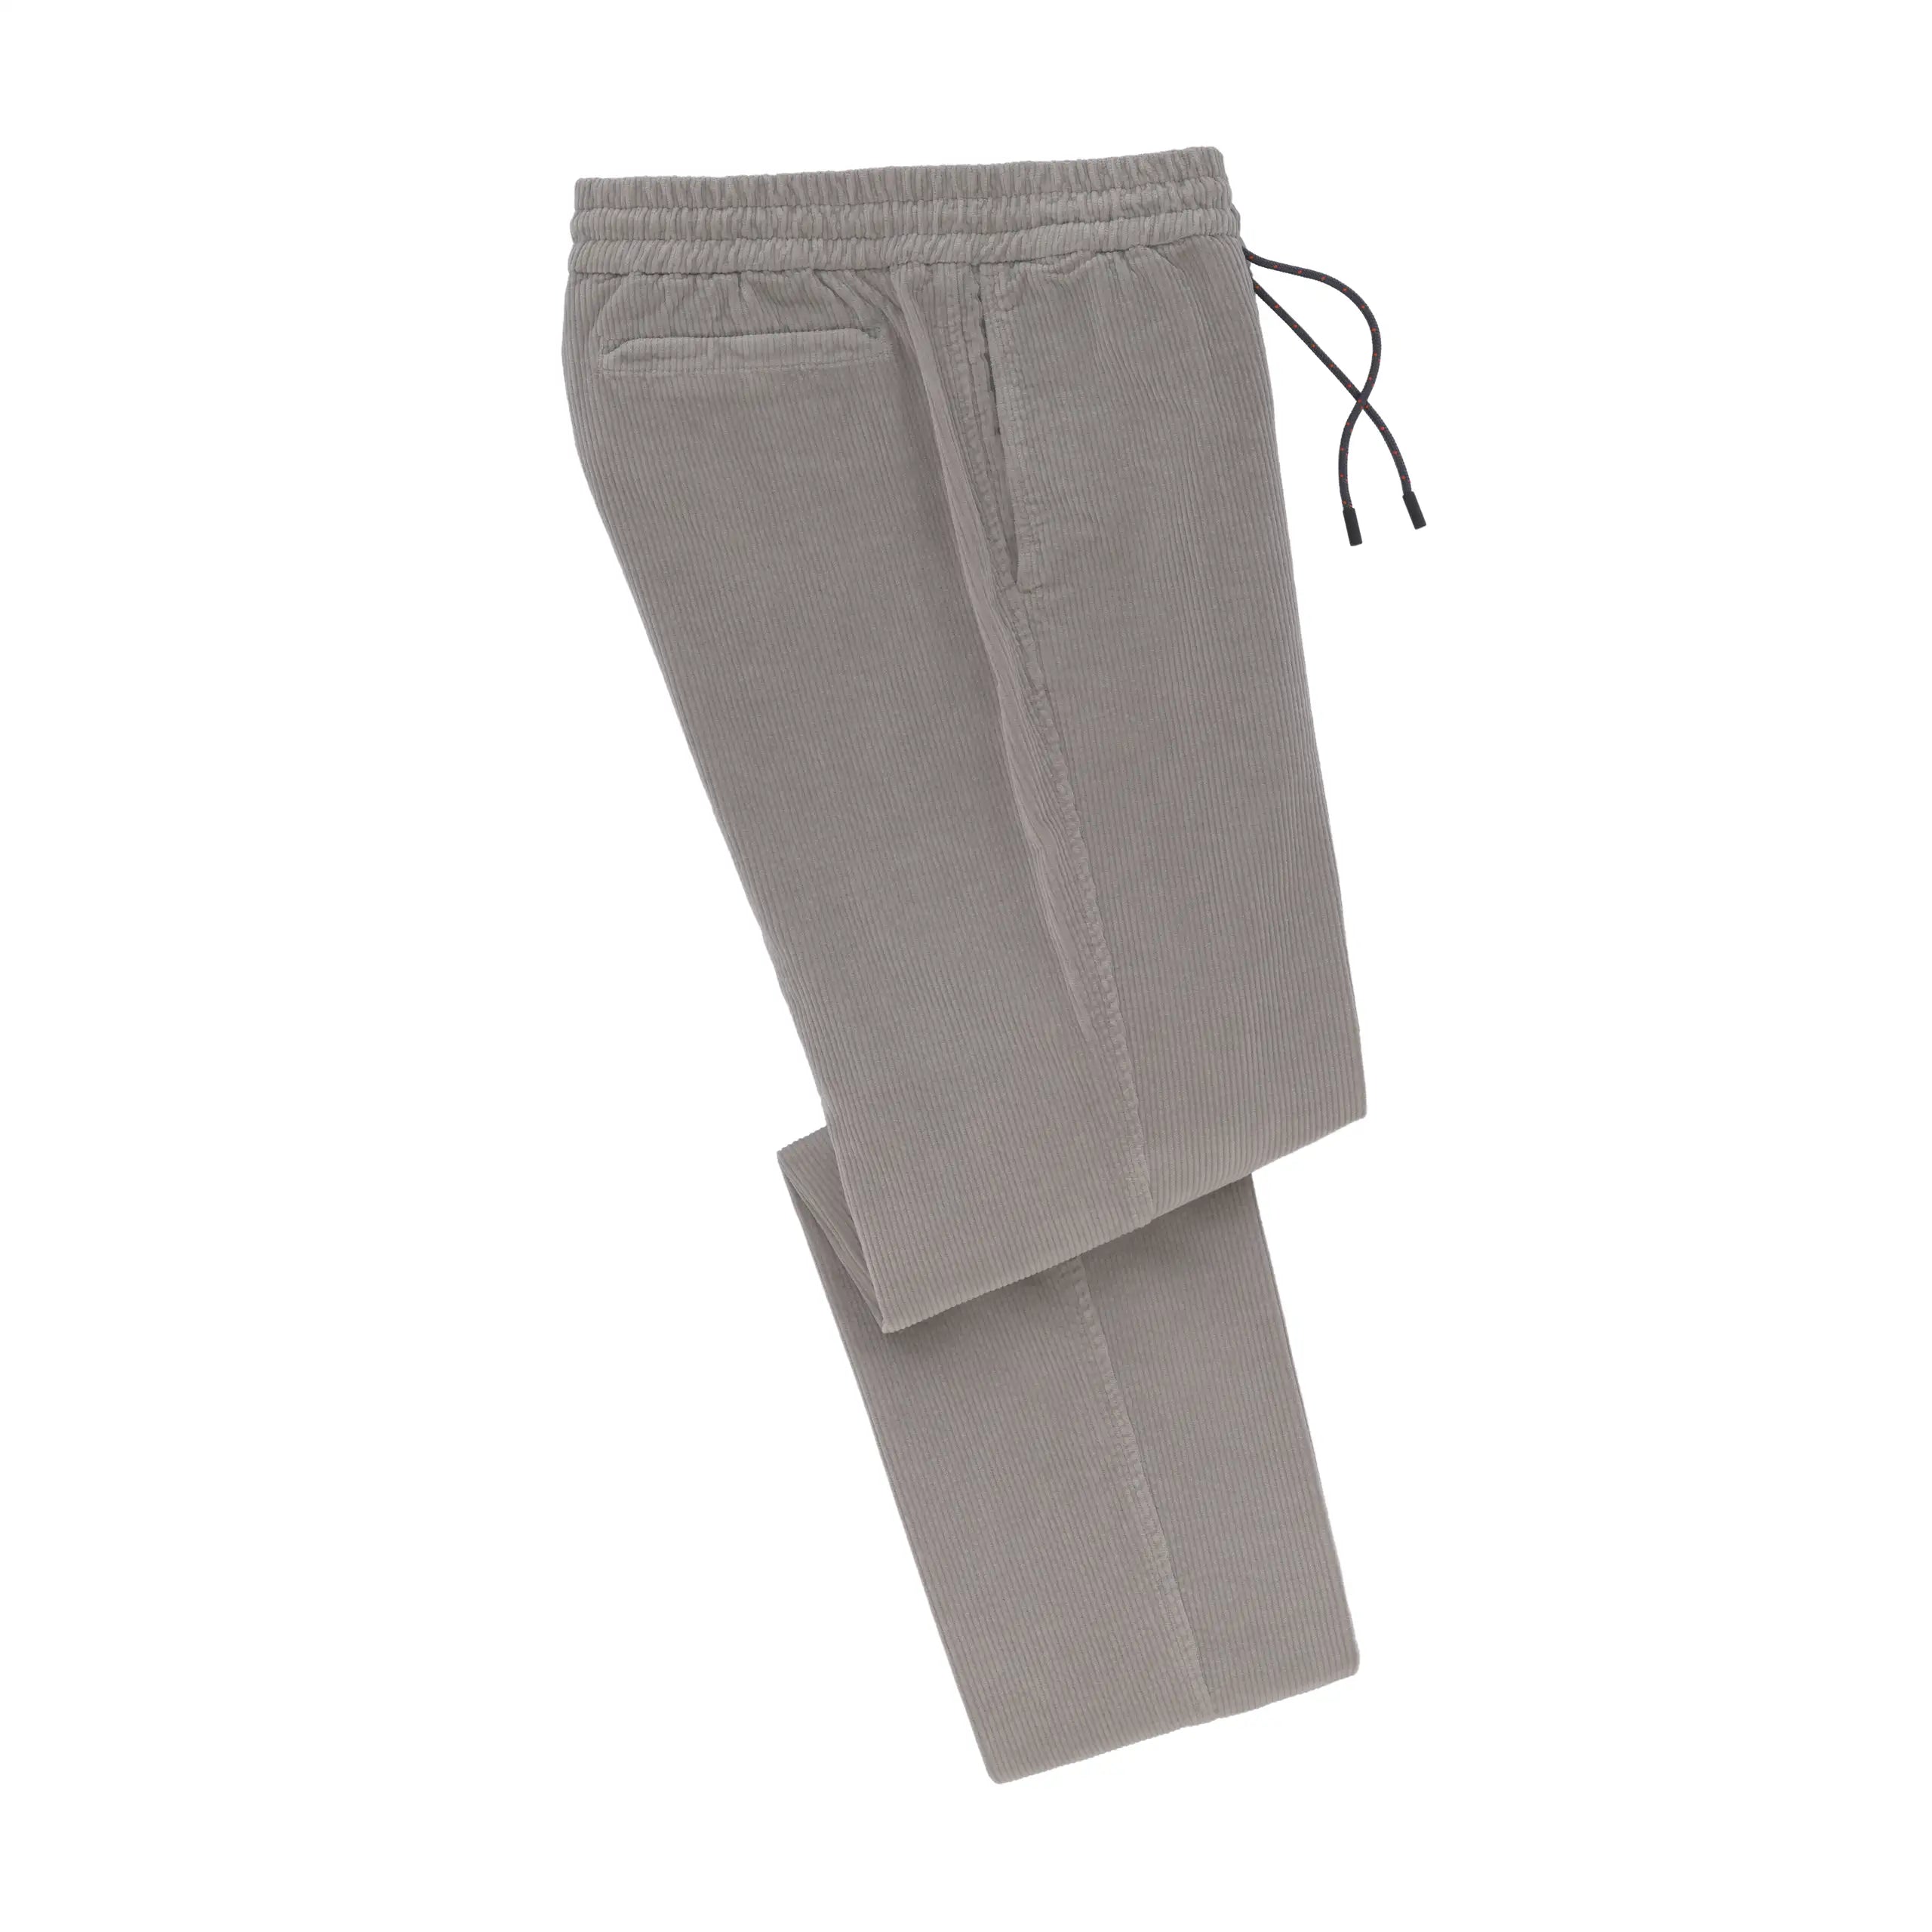 Cotton Mindset Corduroy Trousers in Pearl Grey